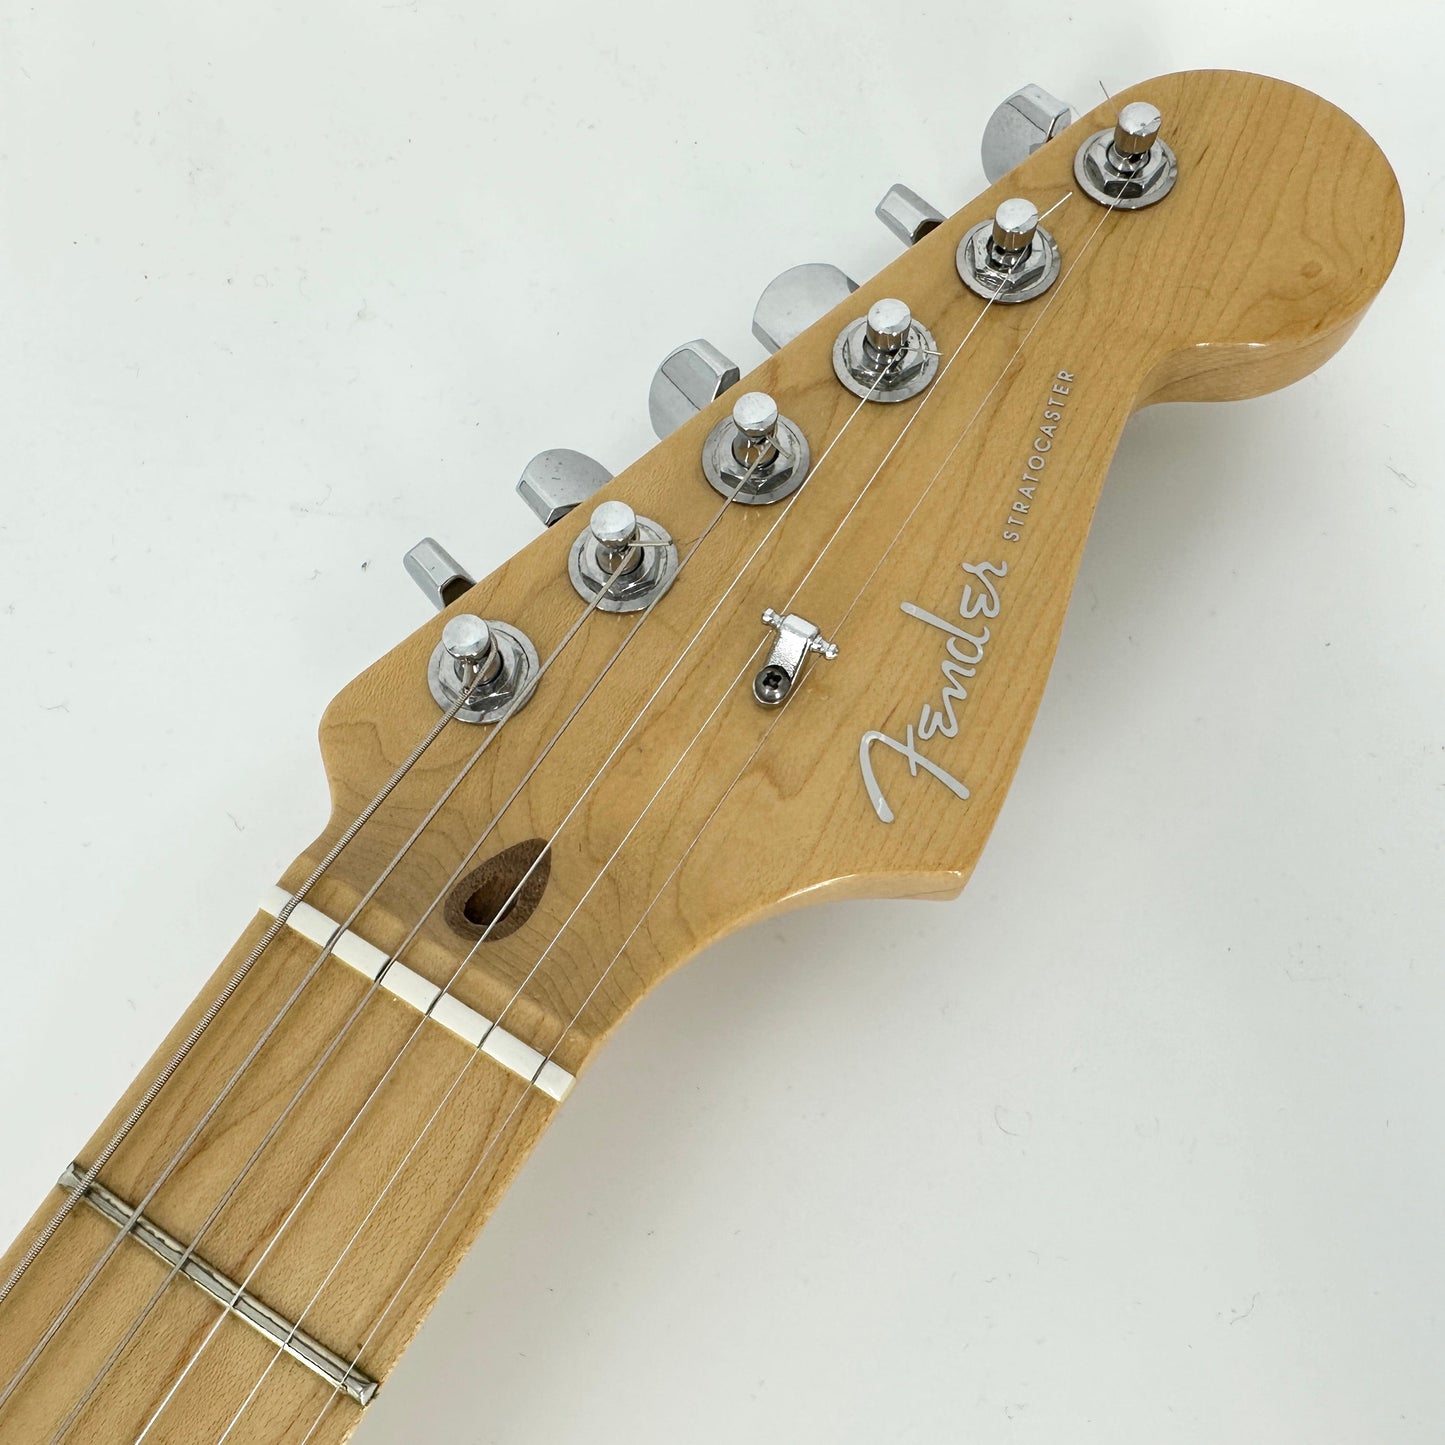 2011 Fender American Deluxe Stratocaster – Olympic Pearl